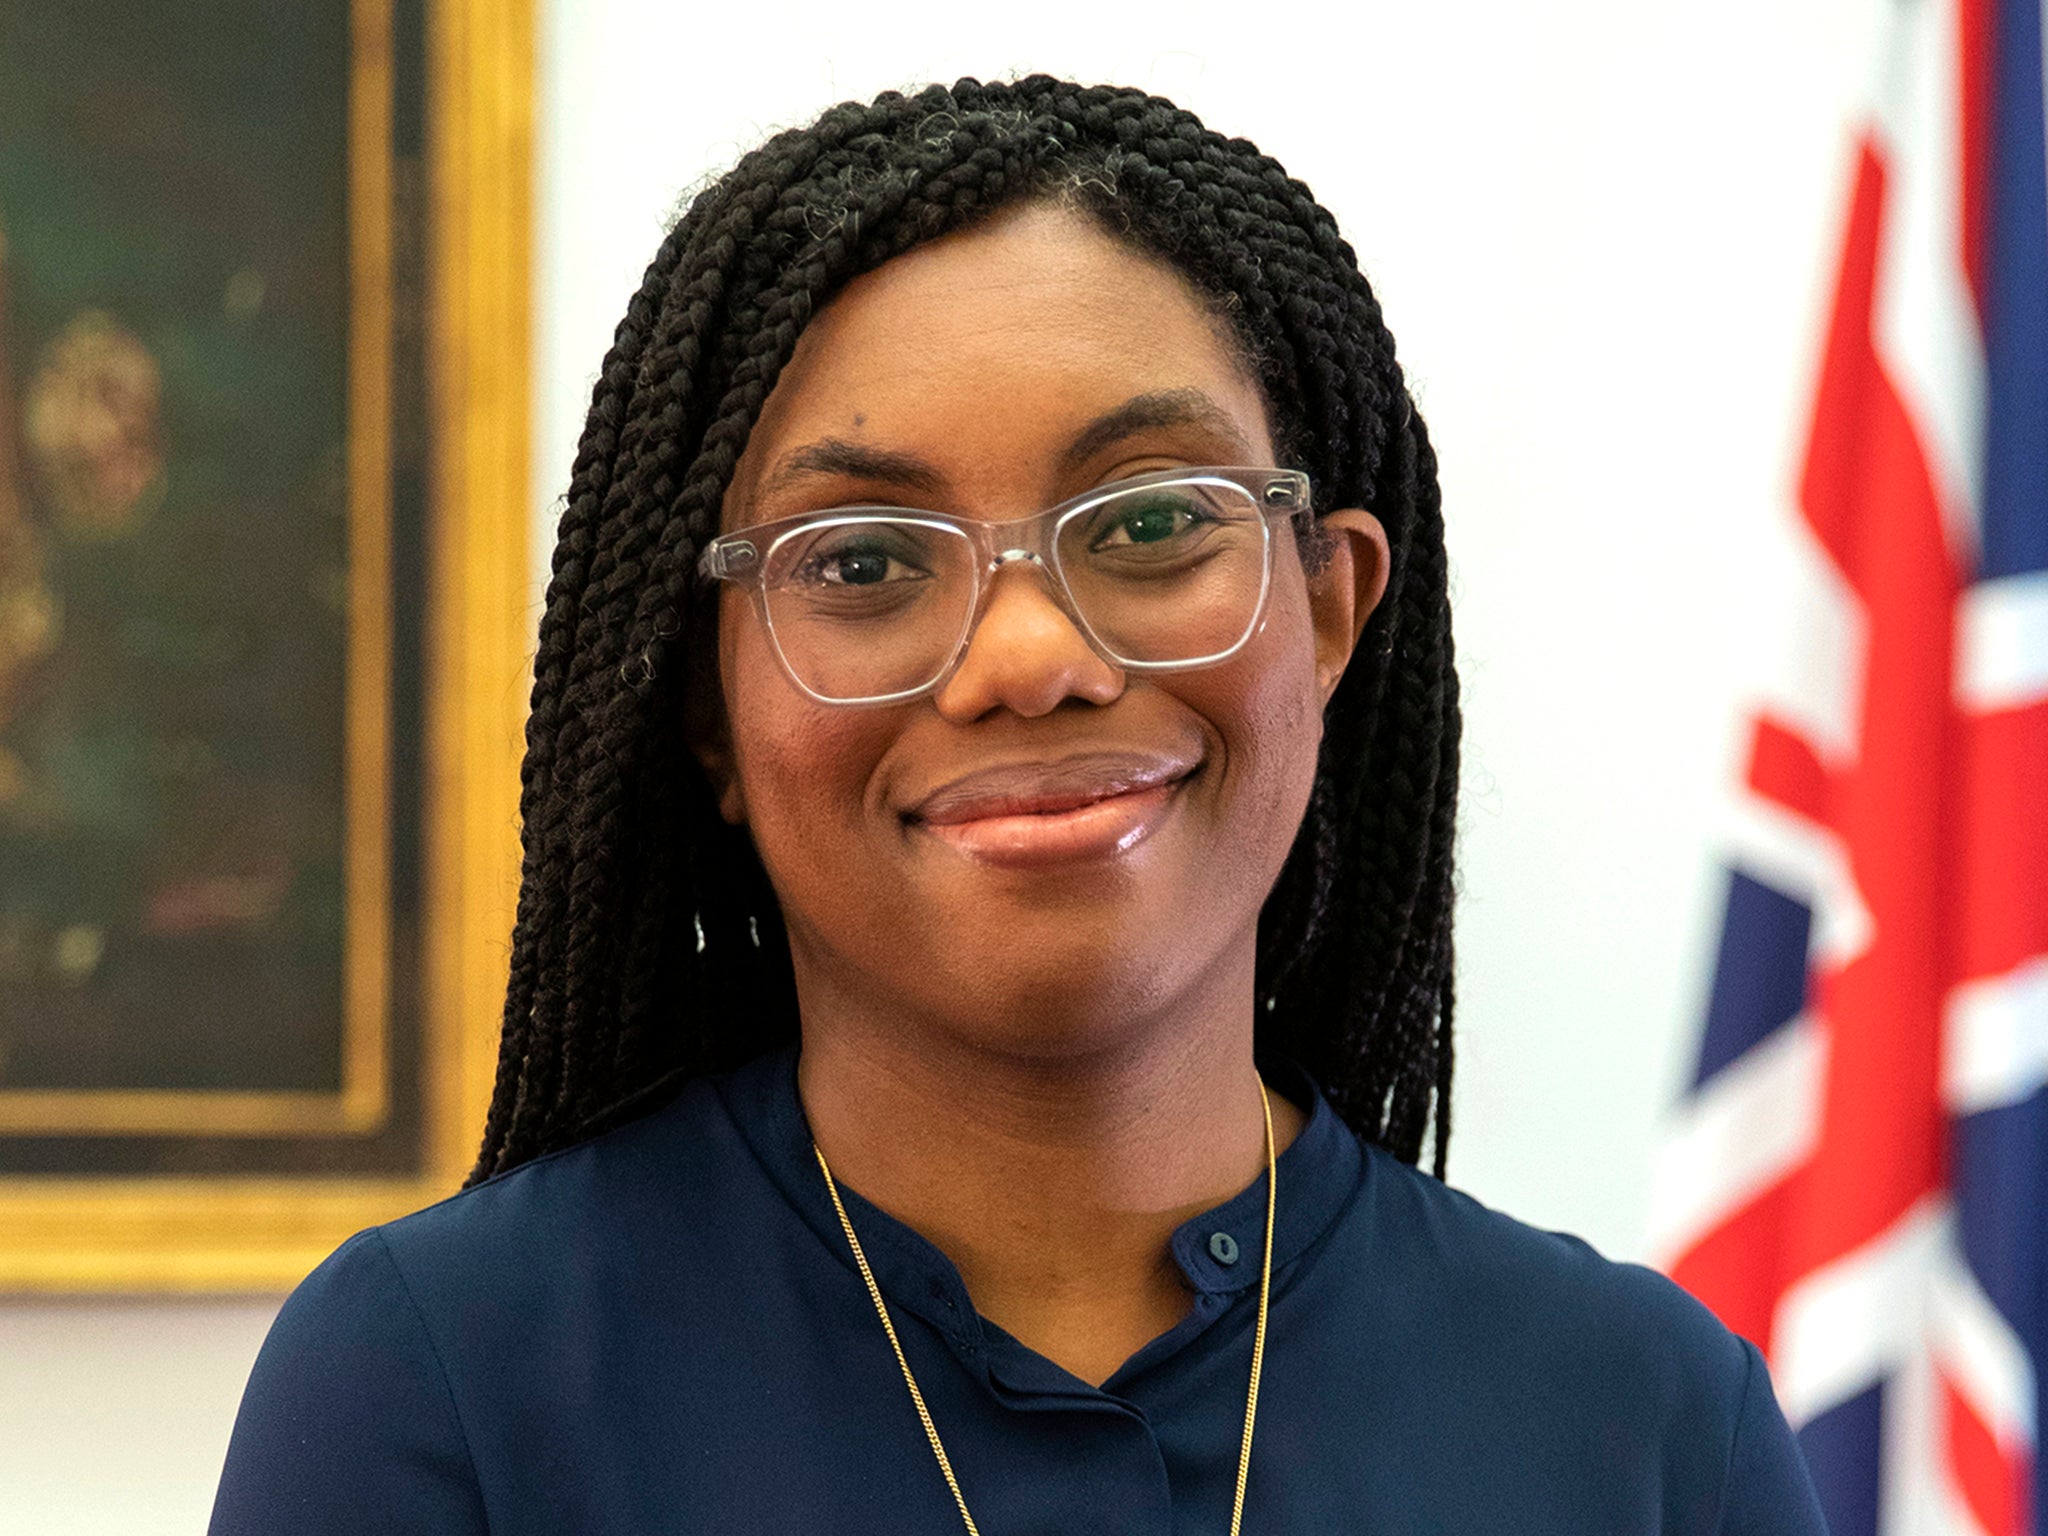 Former equalities minister Kemi Badenoch has promised tax cuts and declared her opposition to ‘identity politics’